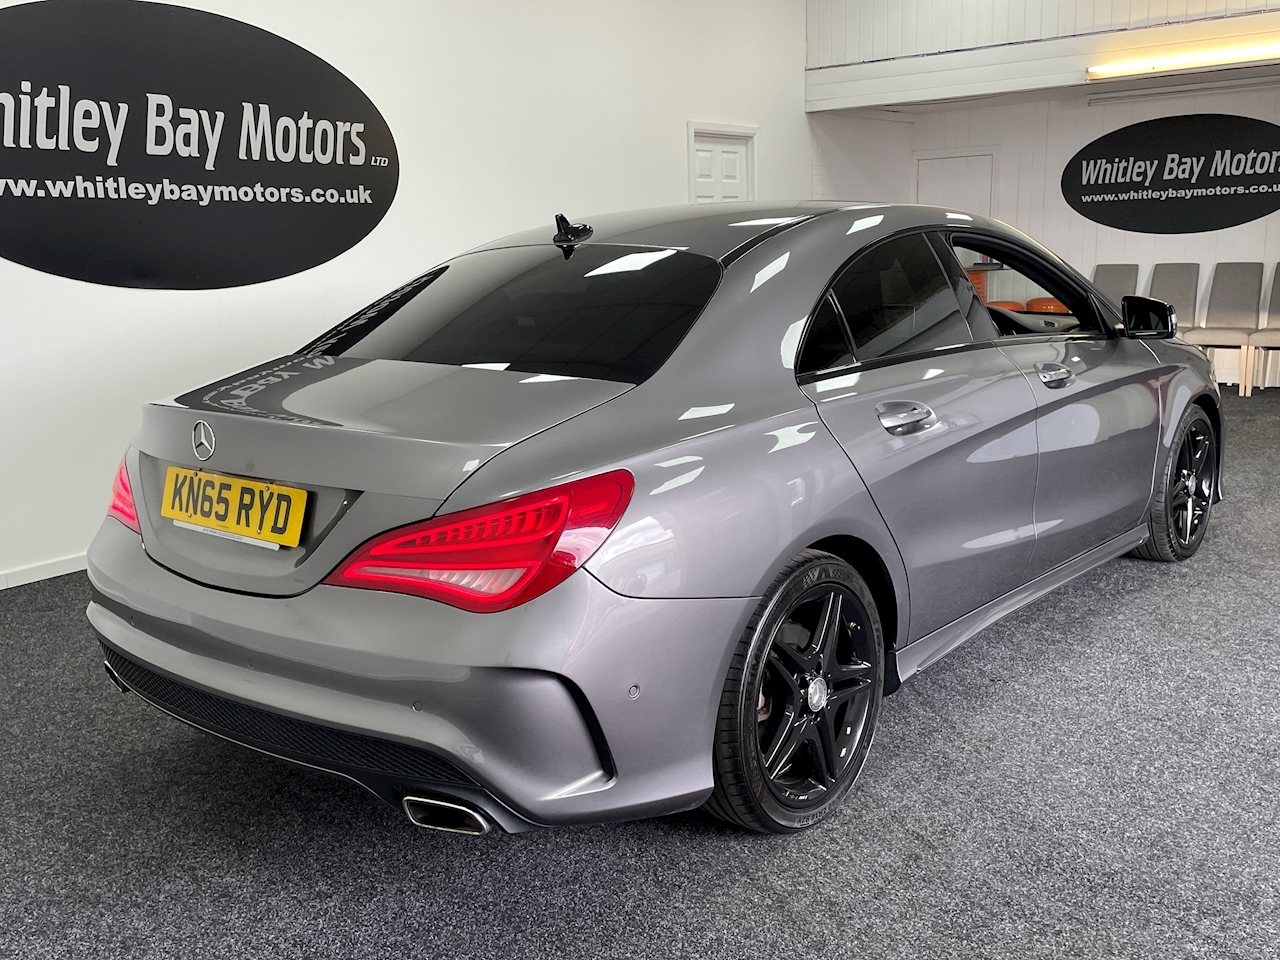 2.1 CLA220 CDI AMG Sport Coupe 4dr Diesel 7G-DCT (s/s) (111 g/km, 170 bhp)